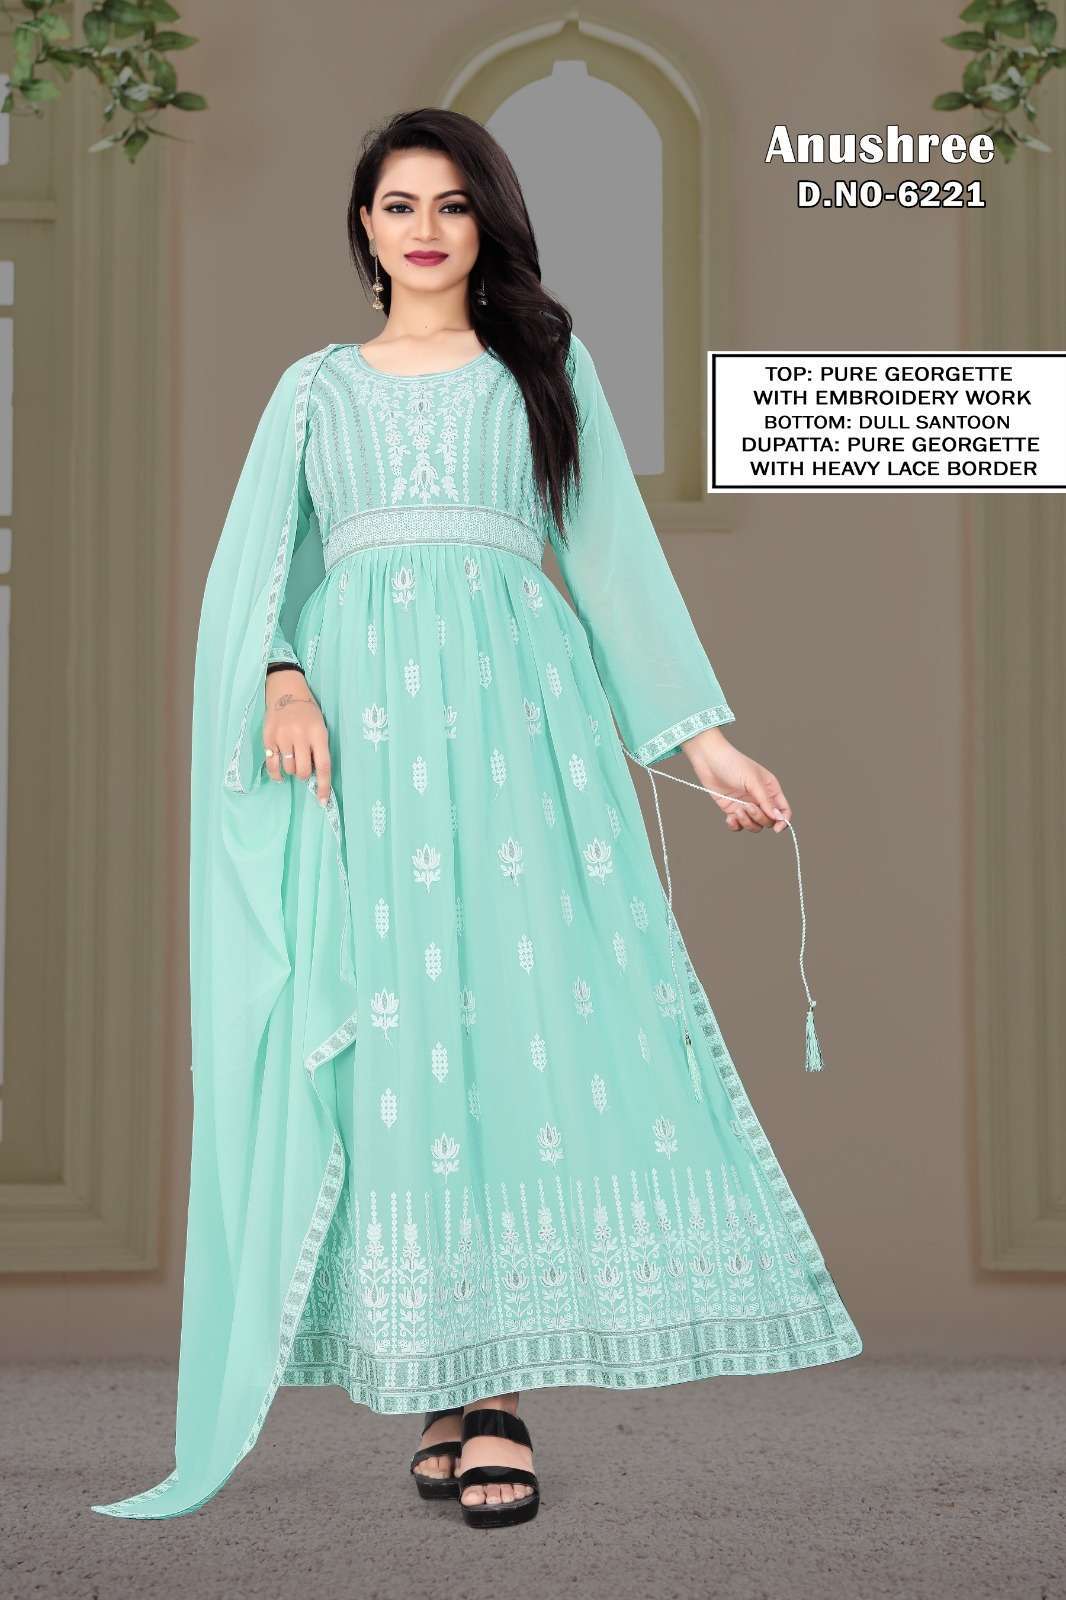 vedanti anushree Pure Georgette With Embroidery Work suit